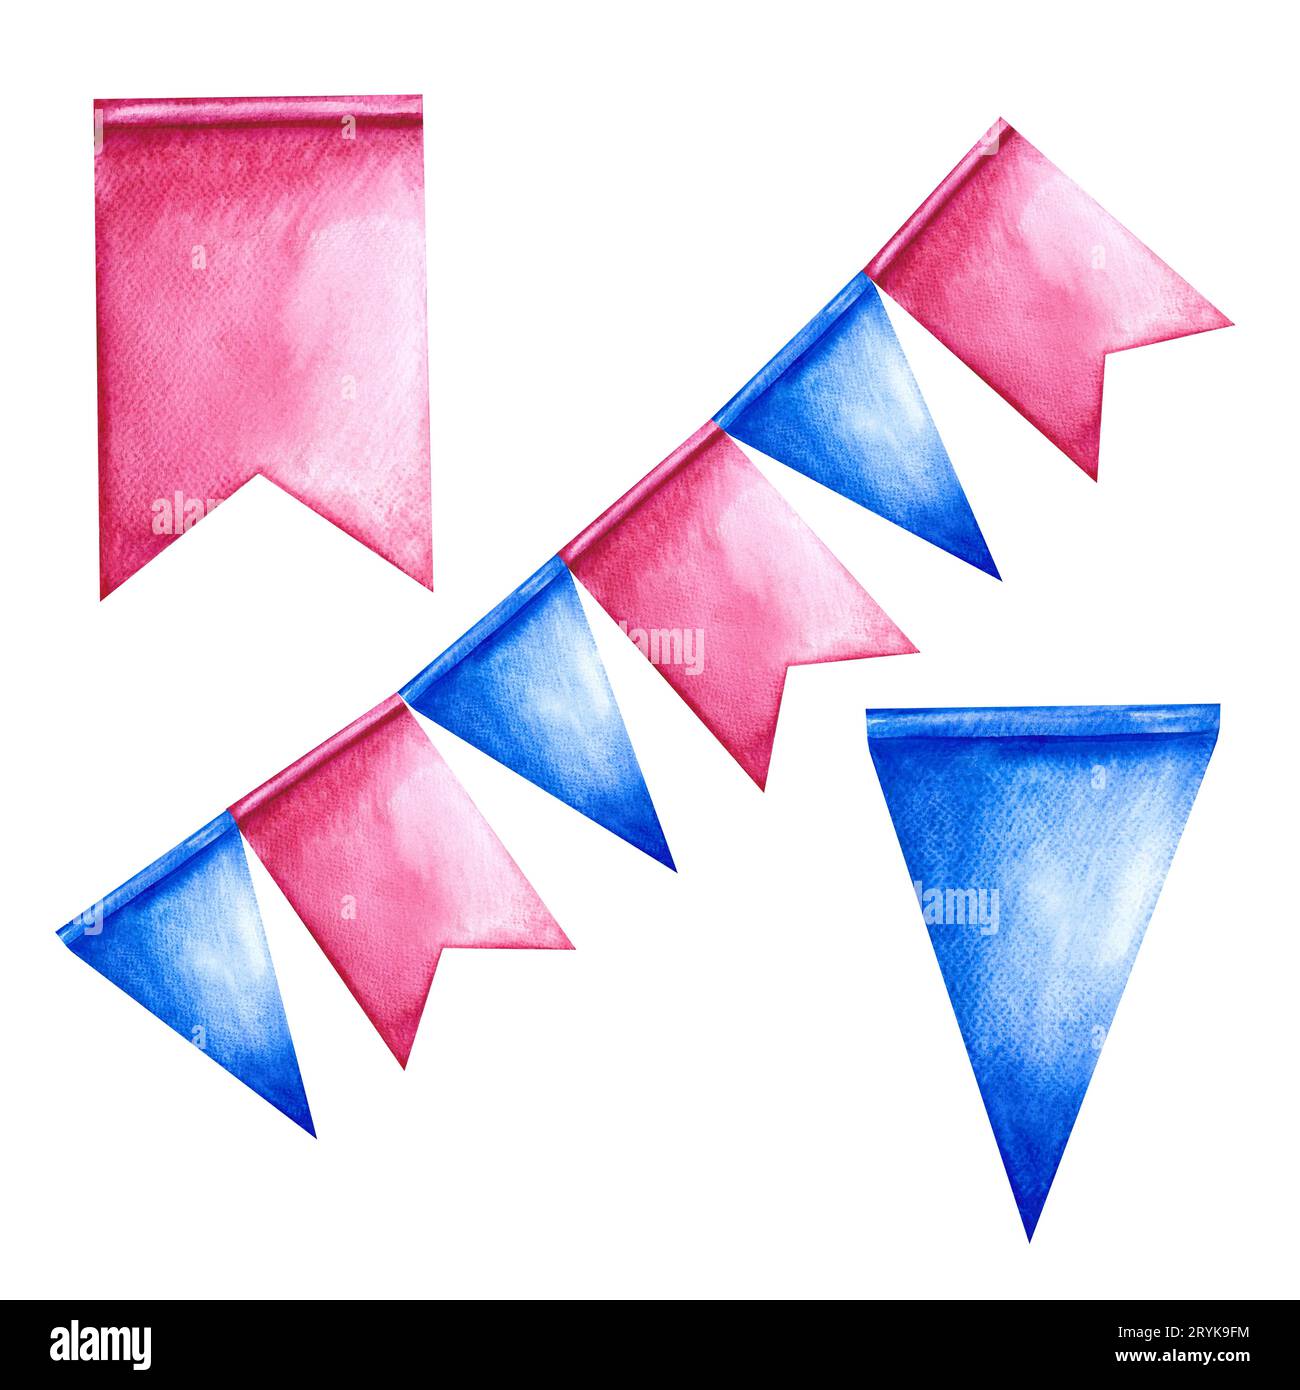 Festive garlands of flags. Pink and blue. Decorative elements of holidays and parties. Handmade watercolor illustration. Isolate. For the design of gr Stock Photo